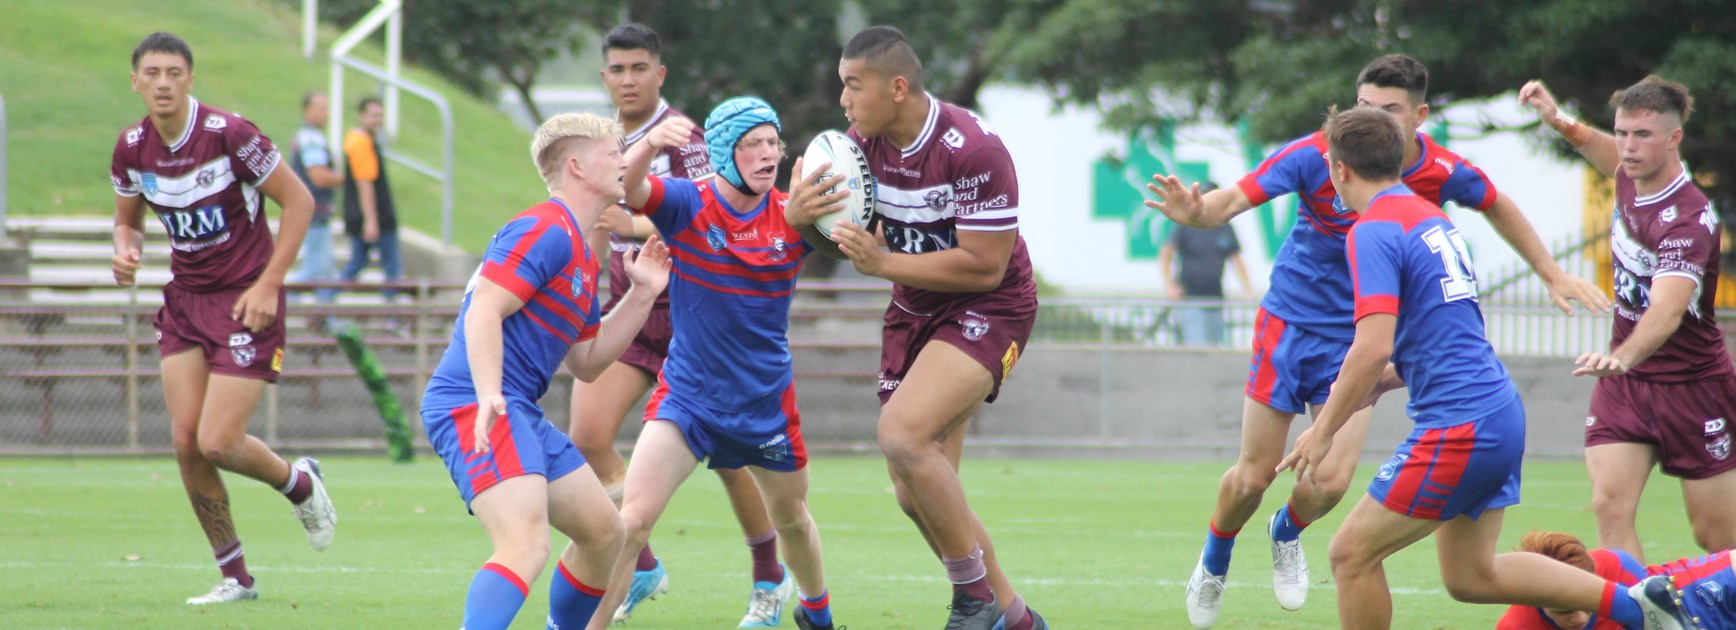 Sea Eagles record strong win over Knights at Lottoland